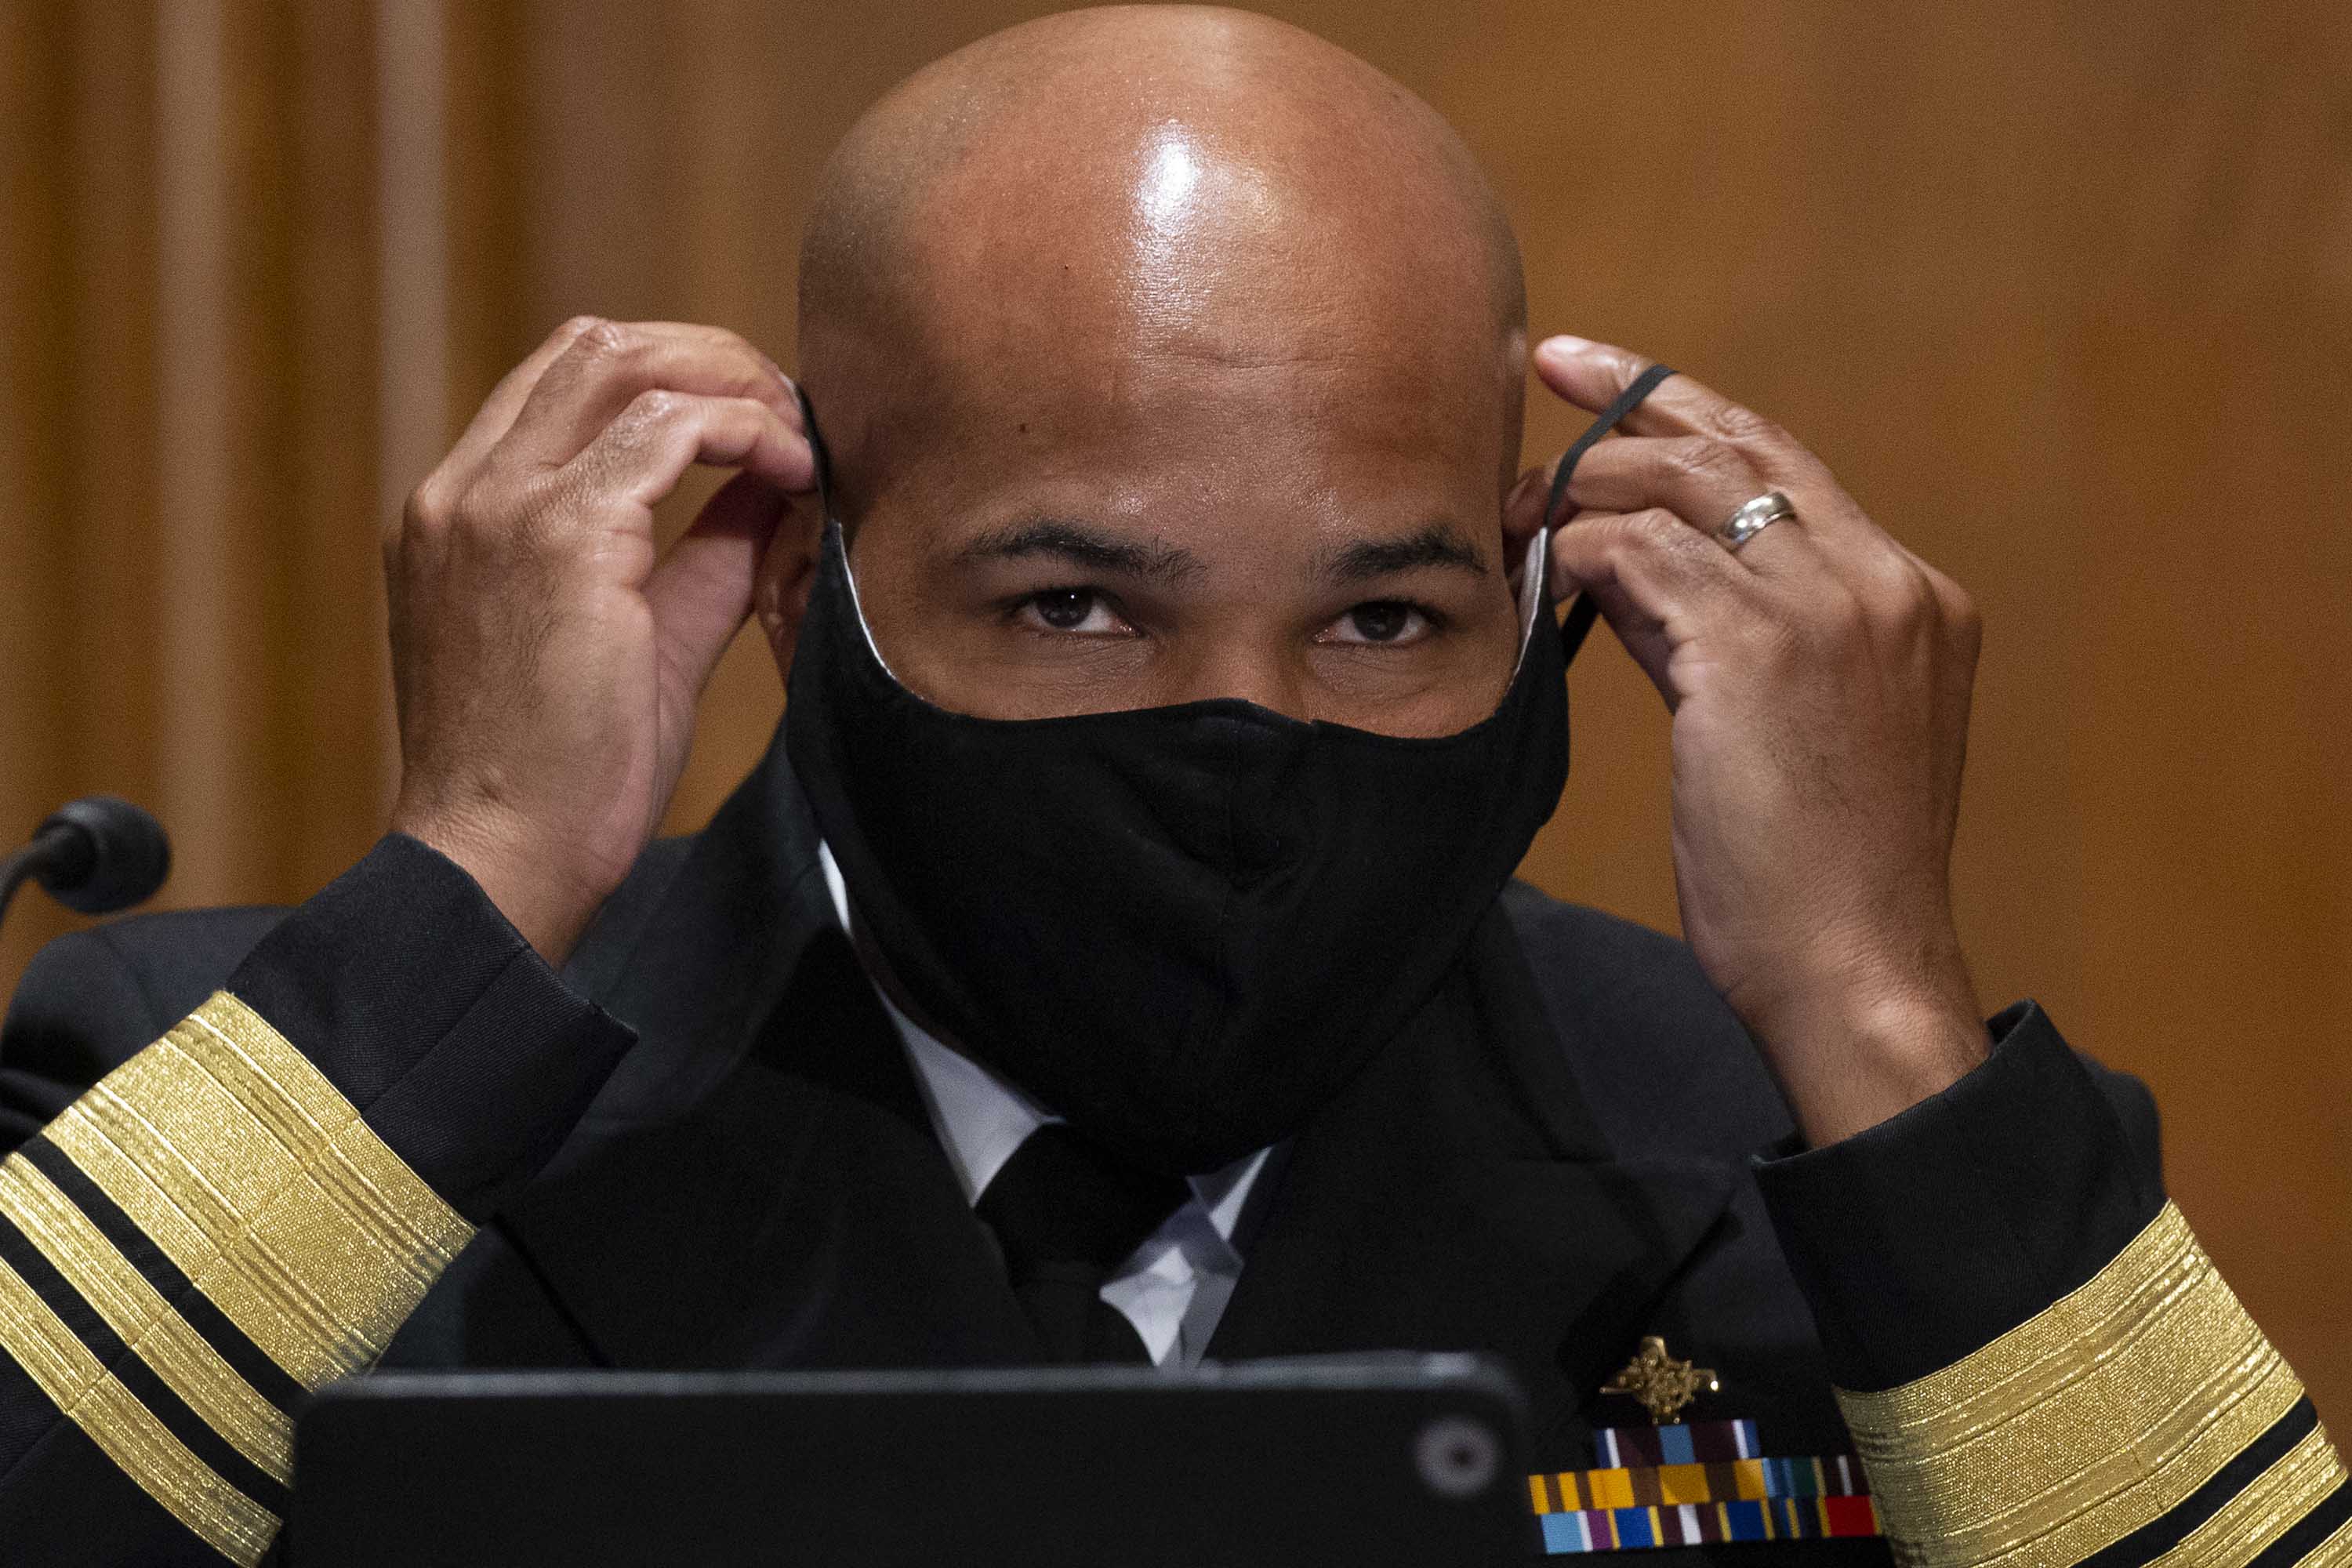 US Surgeon General Jerome Adams puts on a face mask during a Senate Health, Education, Labor, and Pensions Committee hearing to discuss vaccines and protecting public health during the coronavirus pandemic on September 9, in Washington DC.